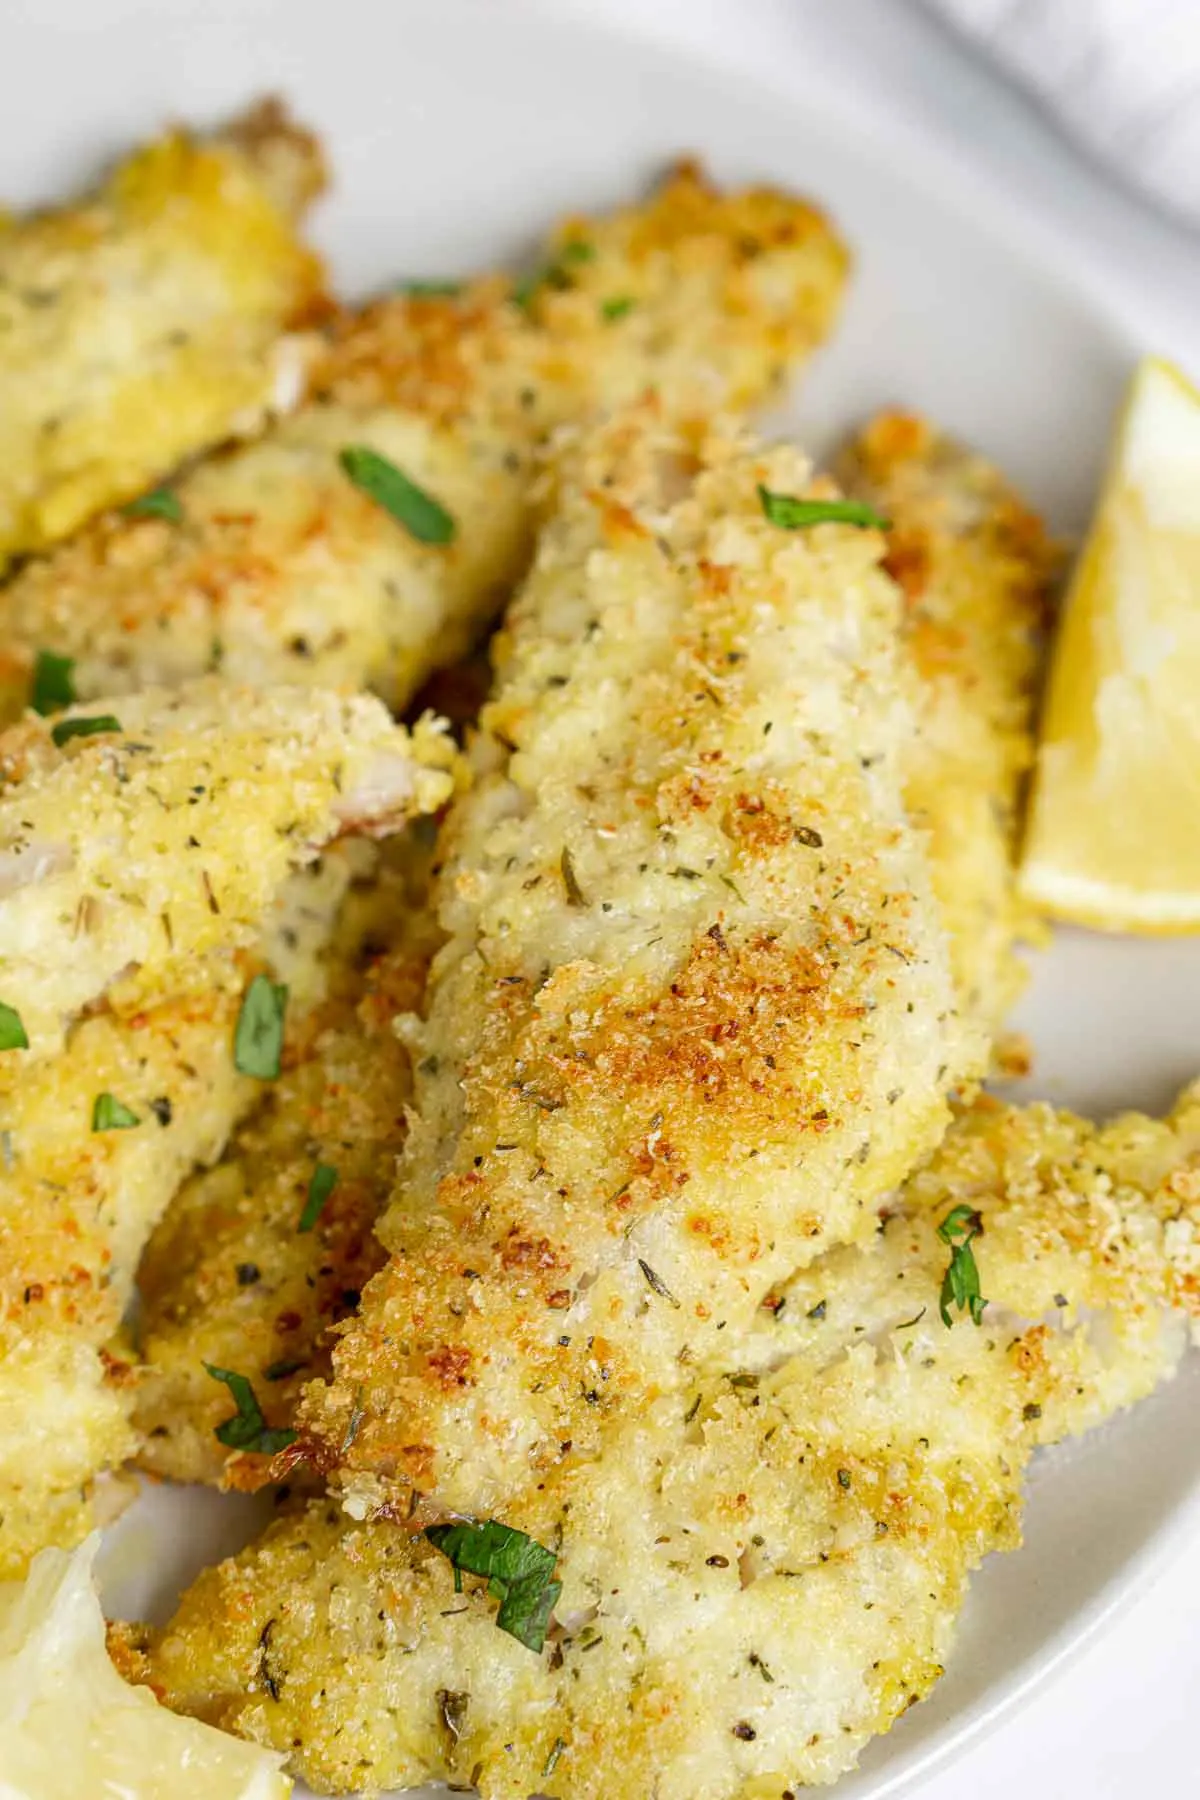 Plate of Parmesan crusted baked perch fillets.